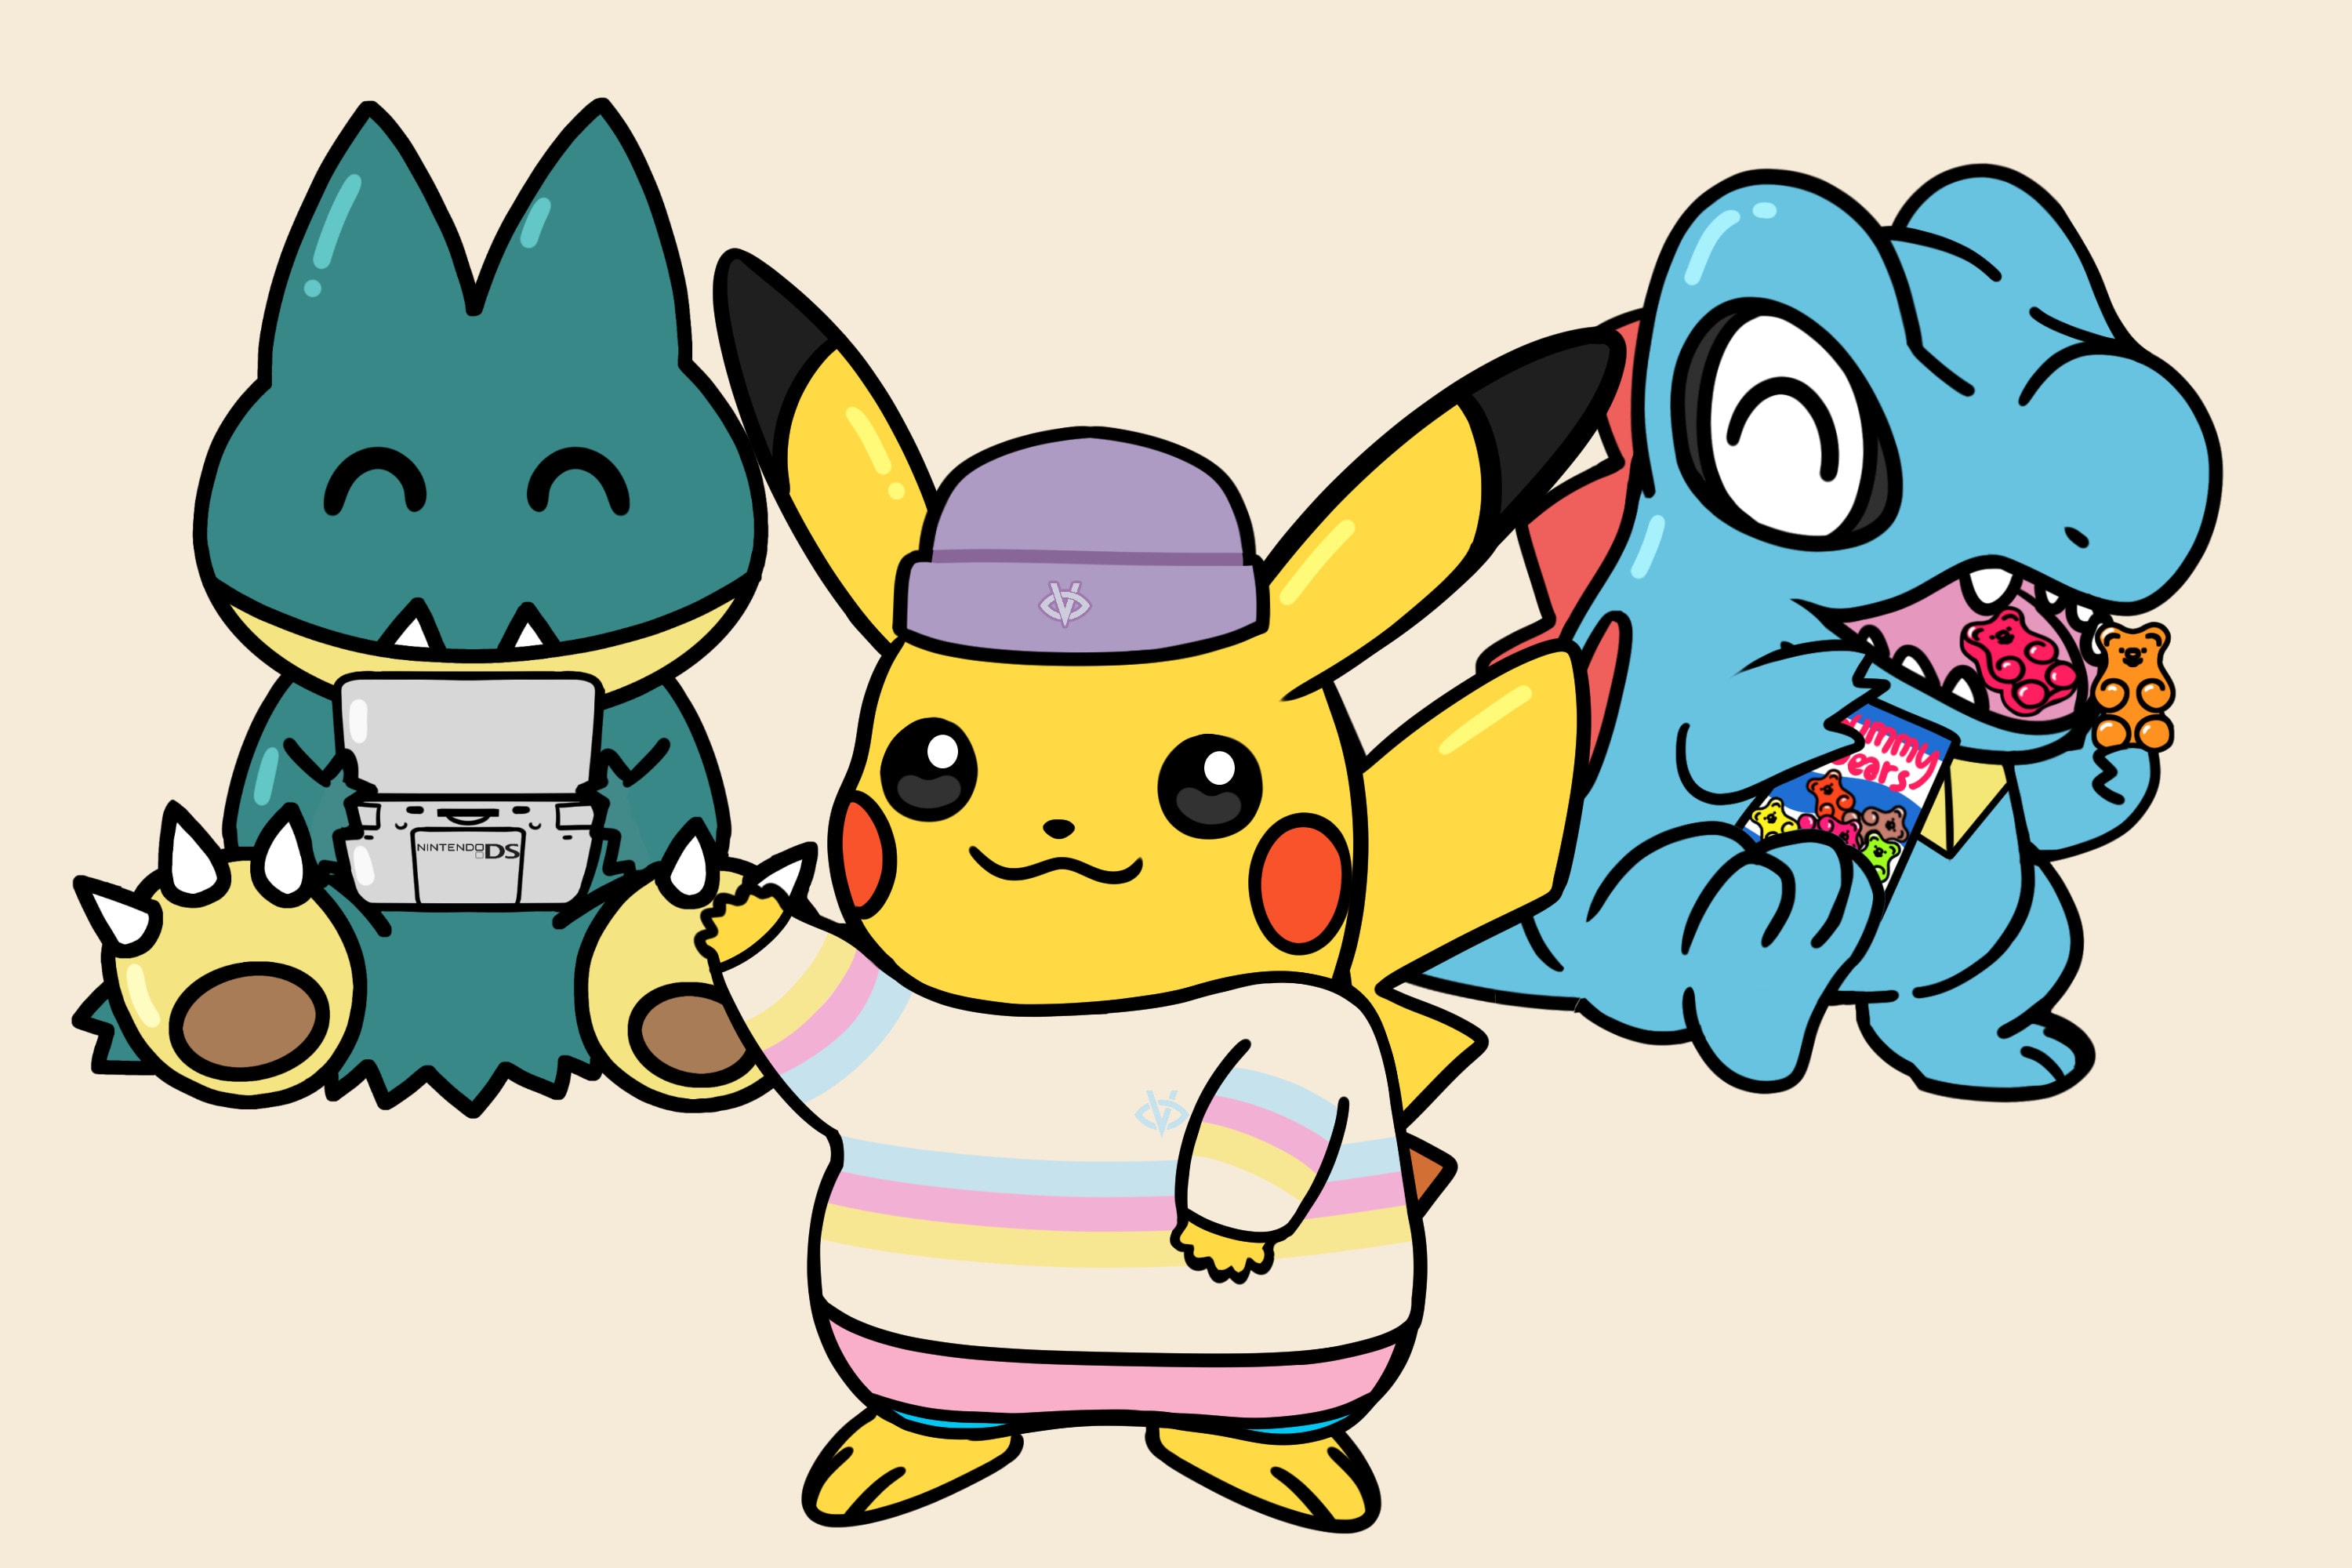 Draw cute pokemon chibi doodle by Faiahaato | Fiverr